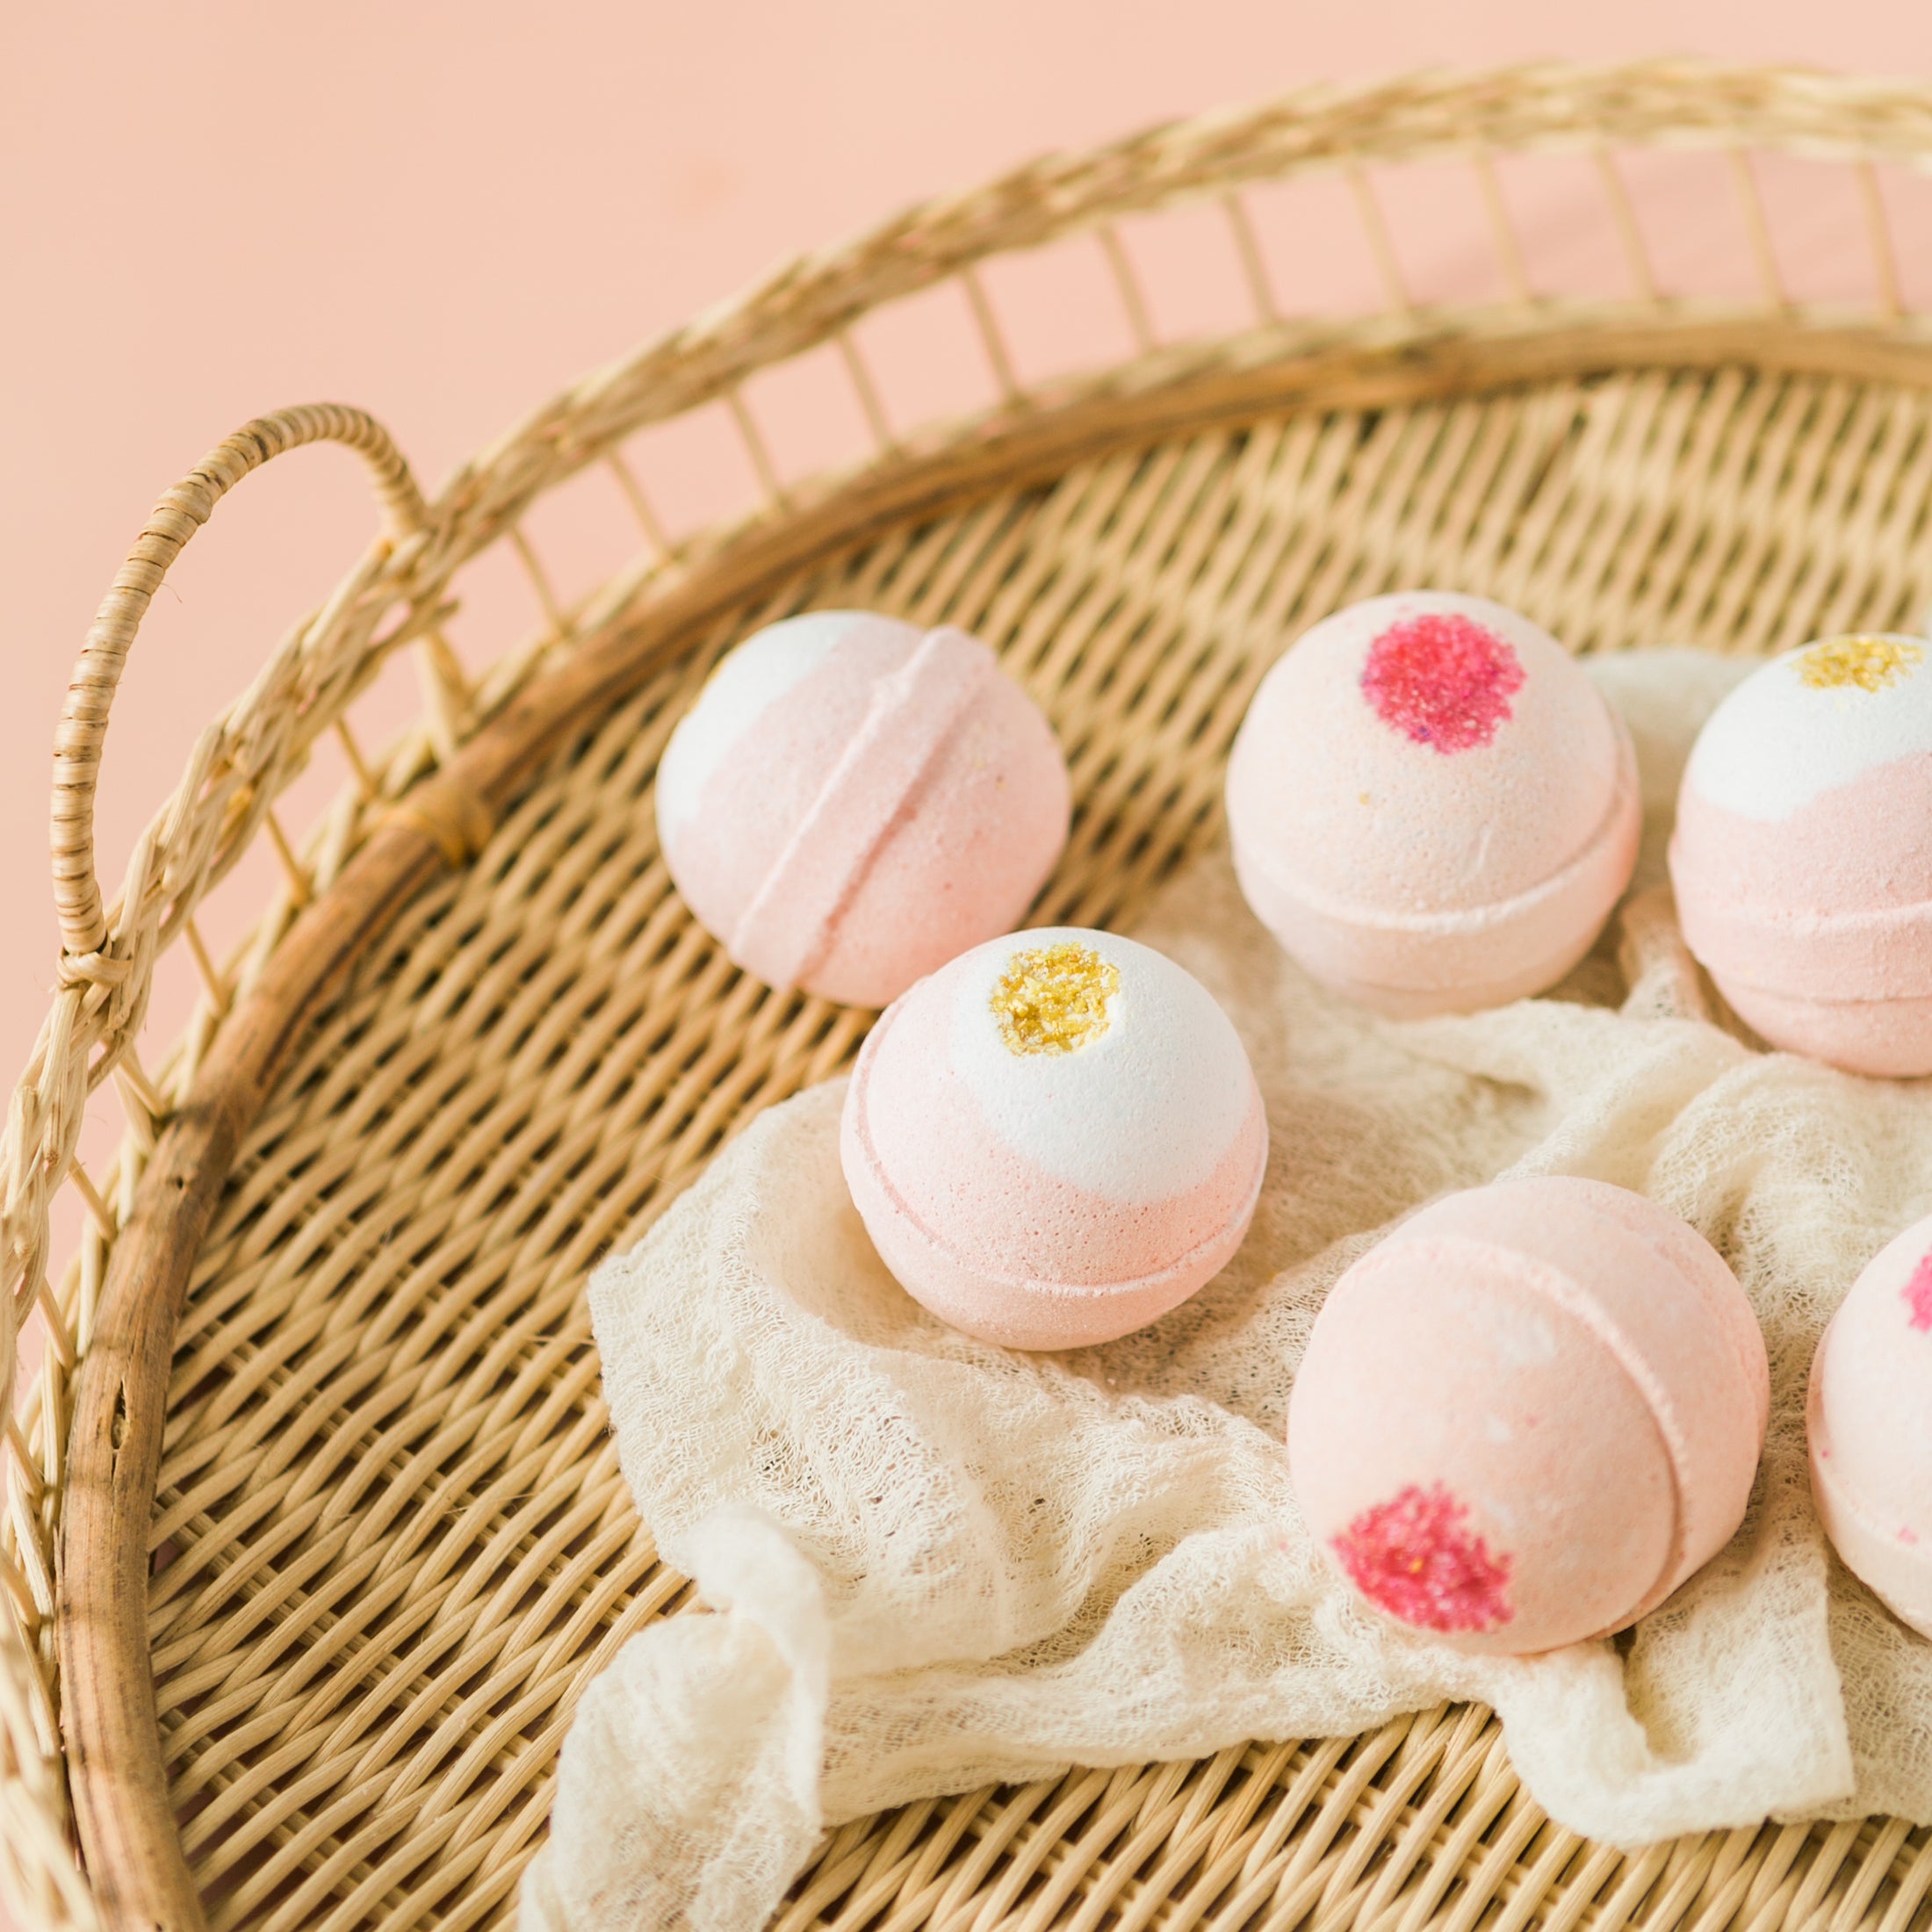 a basket filled with pink and white bath bombs